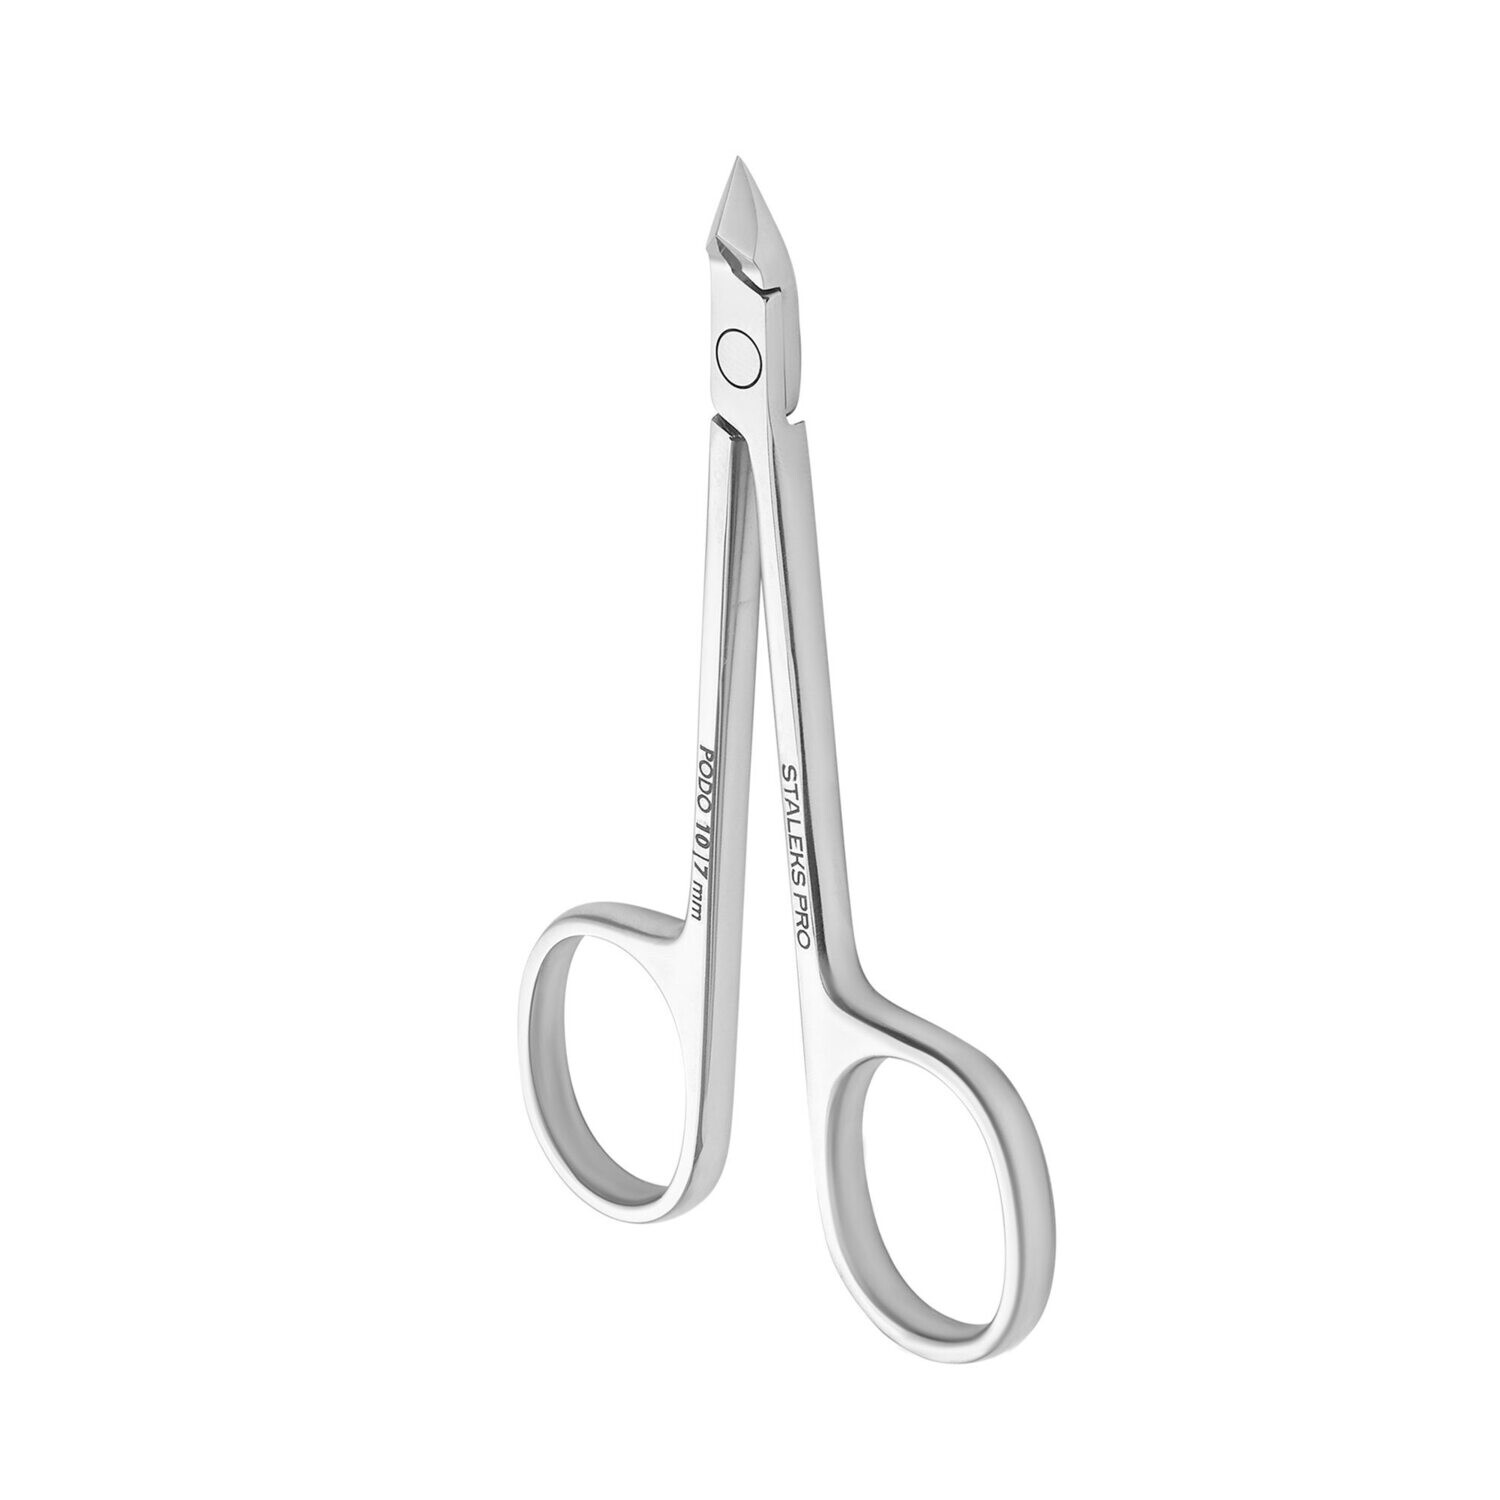 Podology scissors style nippers for cuticle and callus PODO 10 7 mm